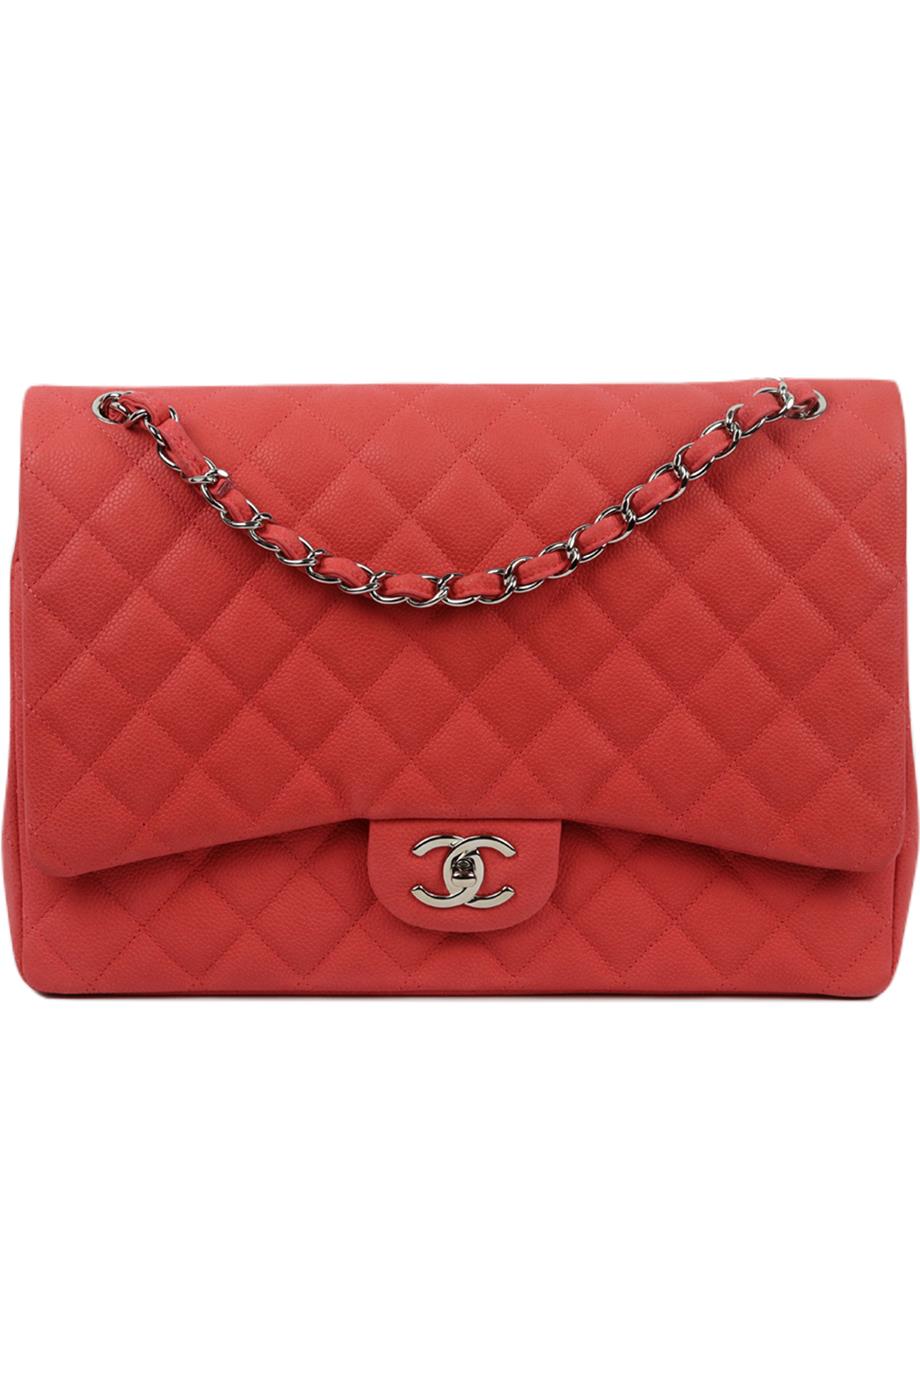 CHANEL 2014 MAXI CLASSIC QUILTED MATTE CAVIAR LEATHER DOUBLE FLAP SHOULDER BAG